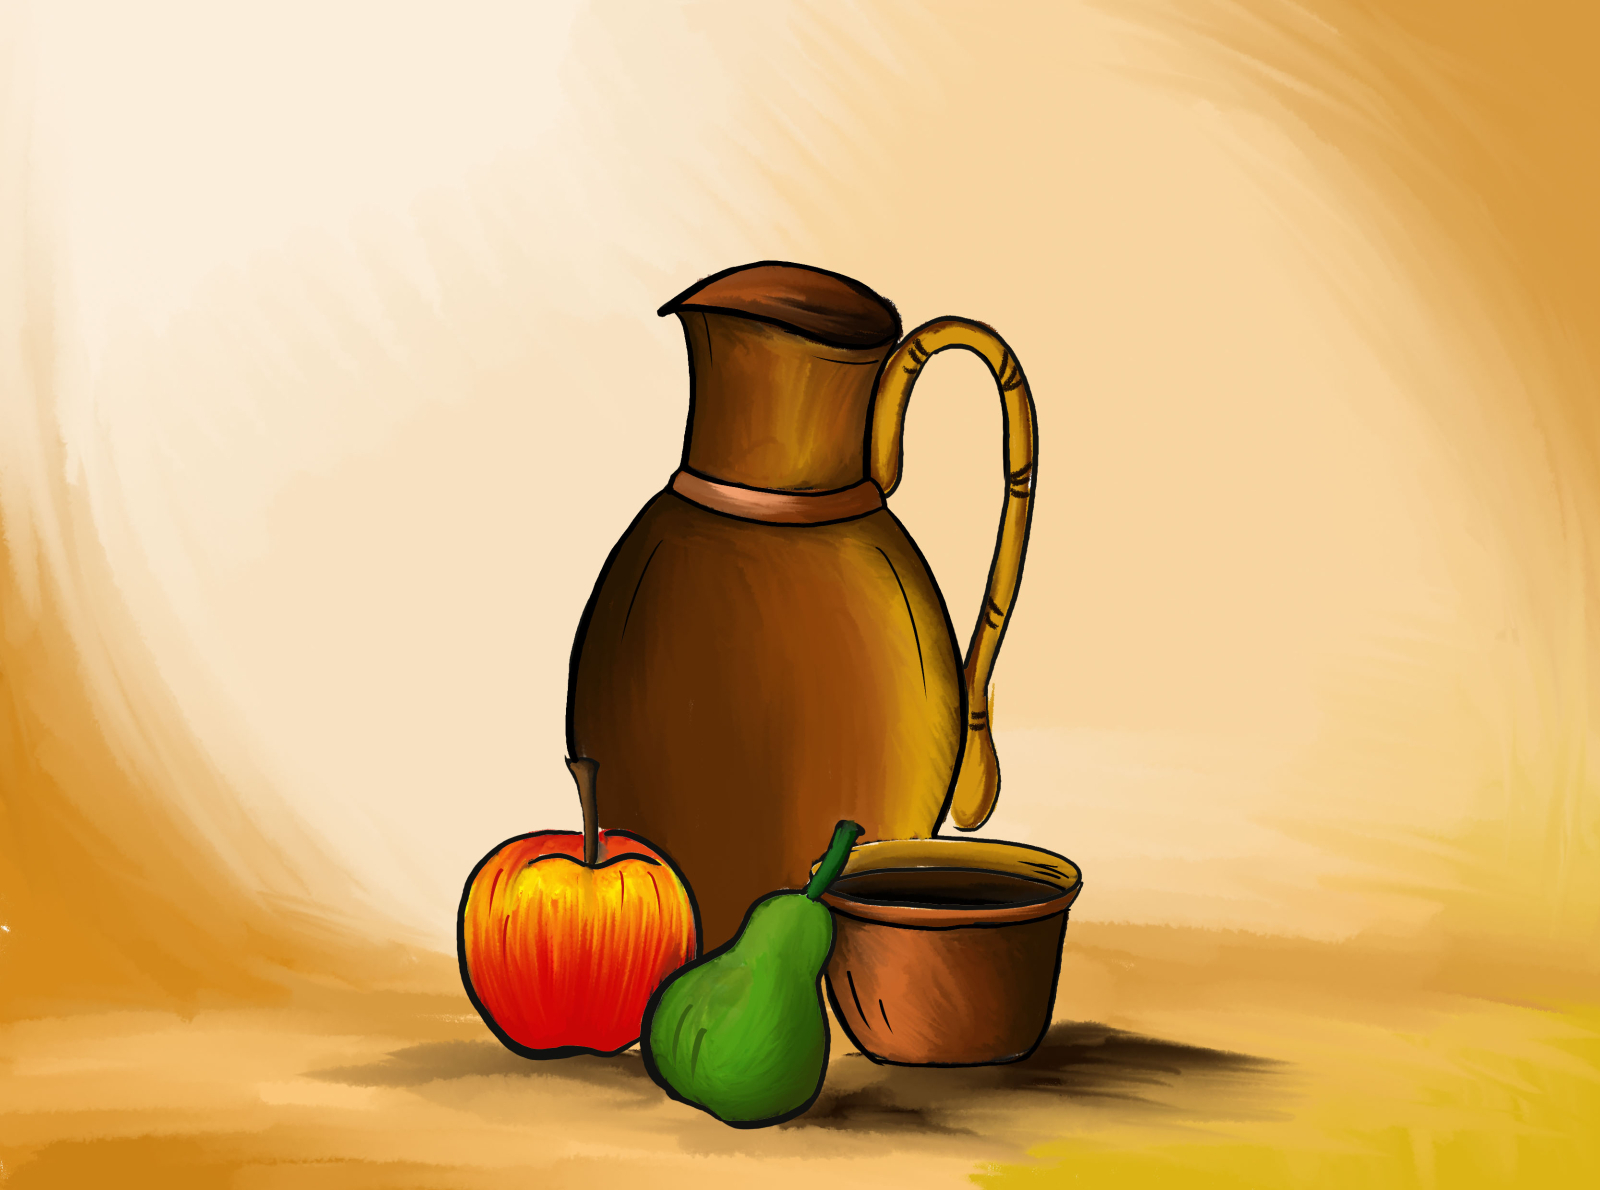 Still Life Composition By Md Sajjad Hossain On Dribbble